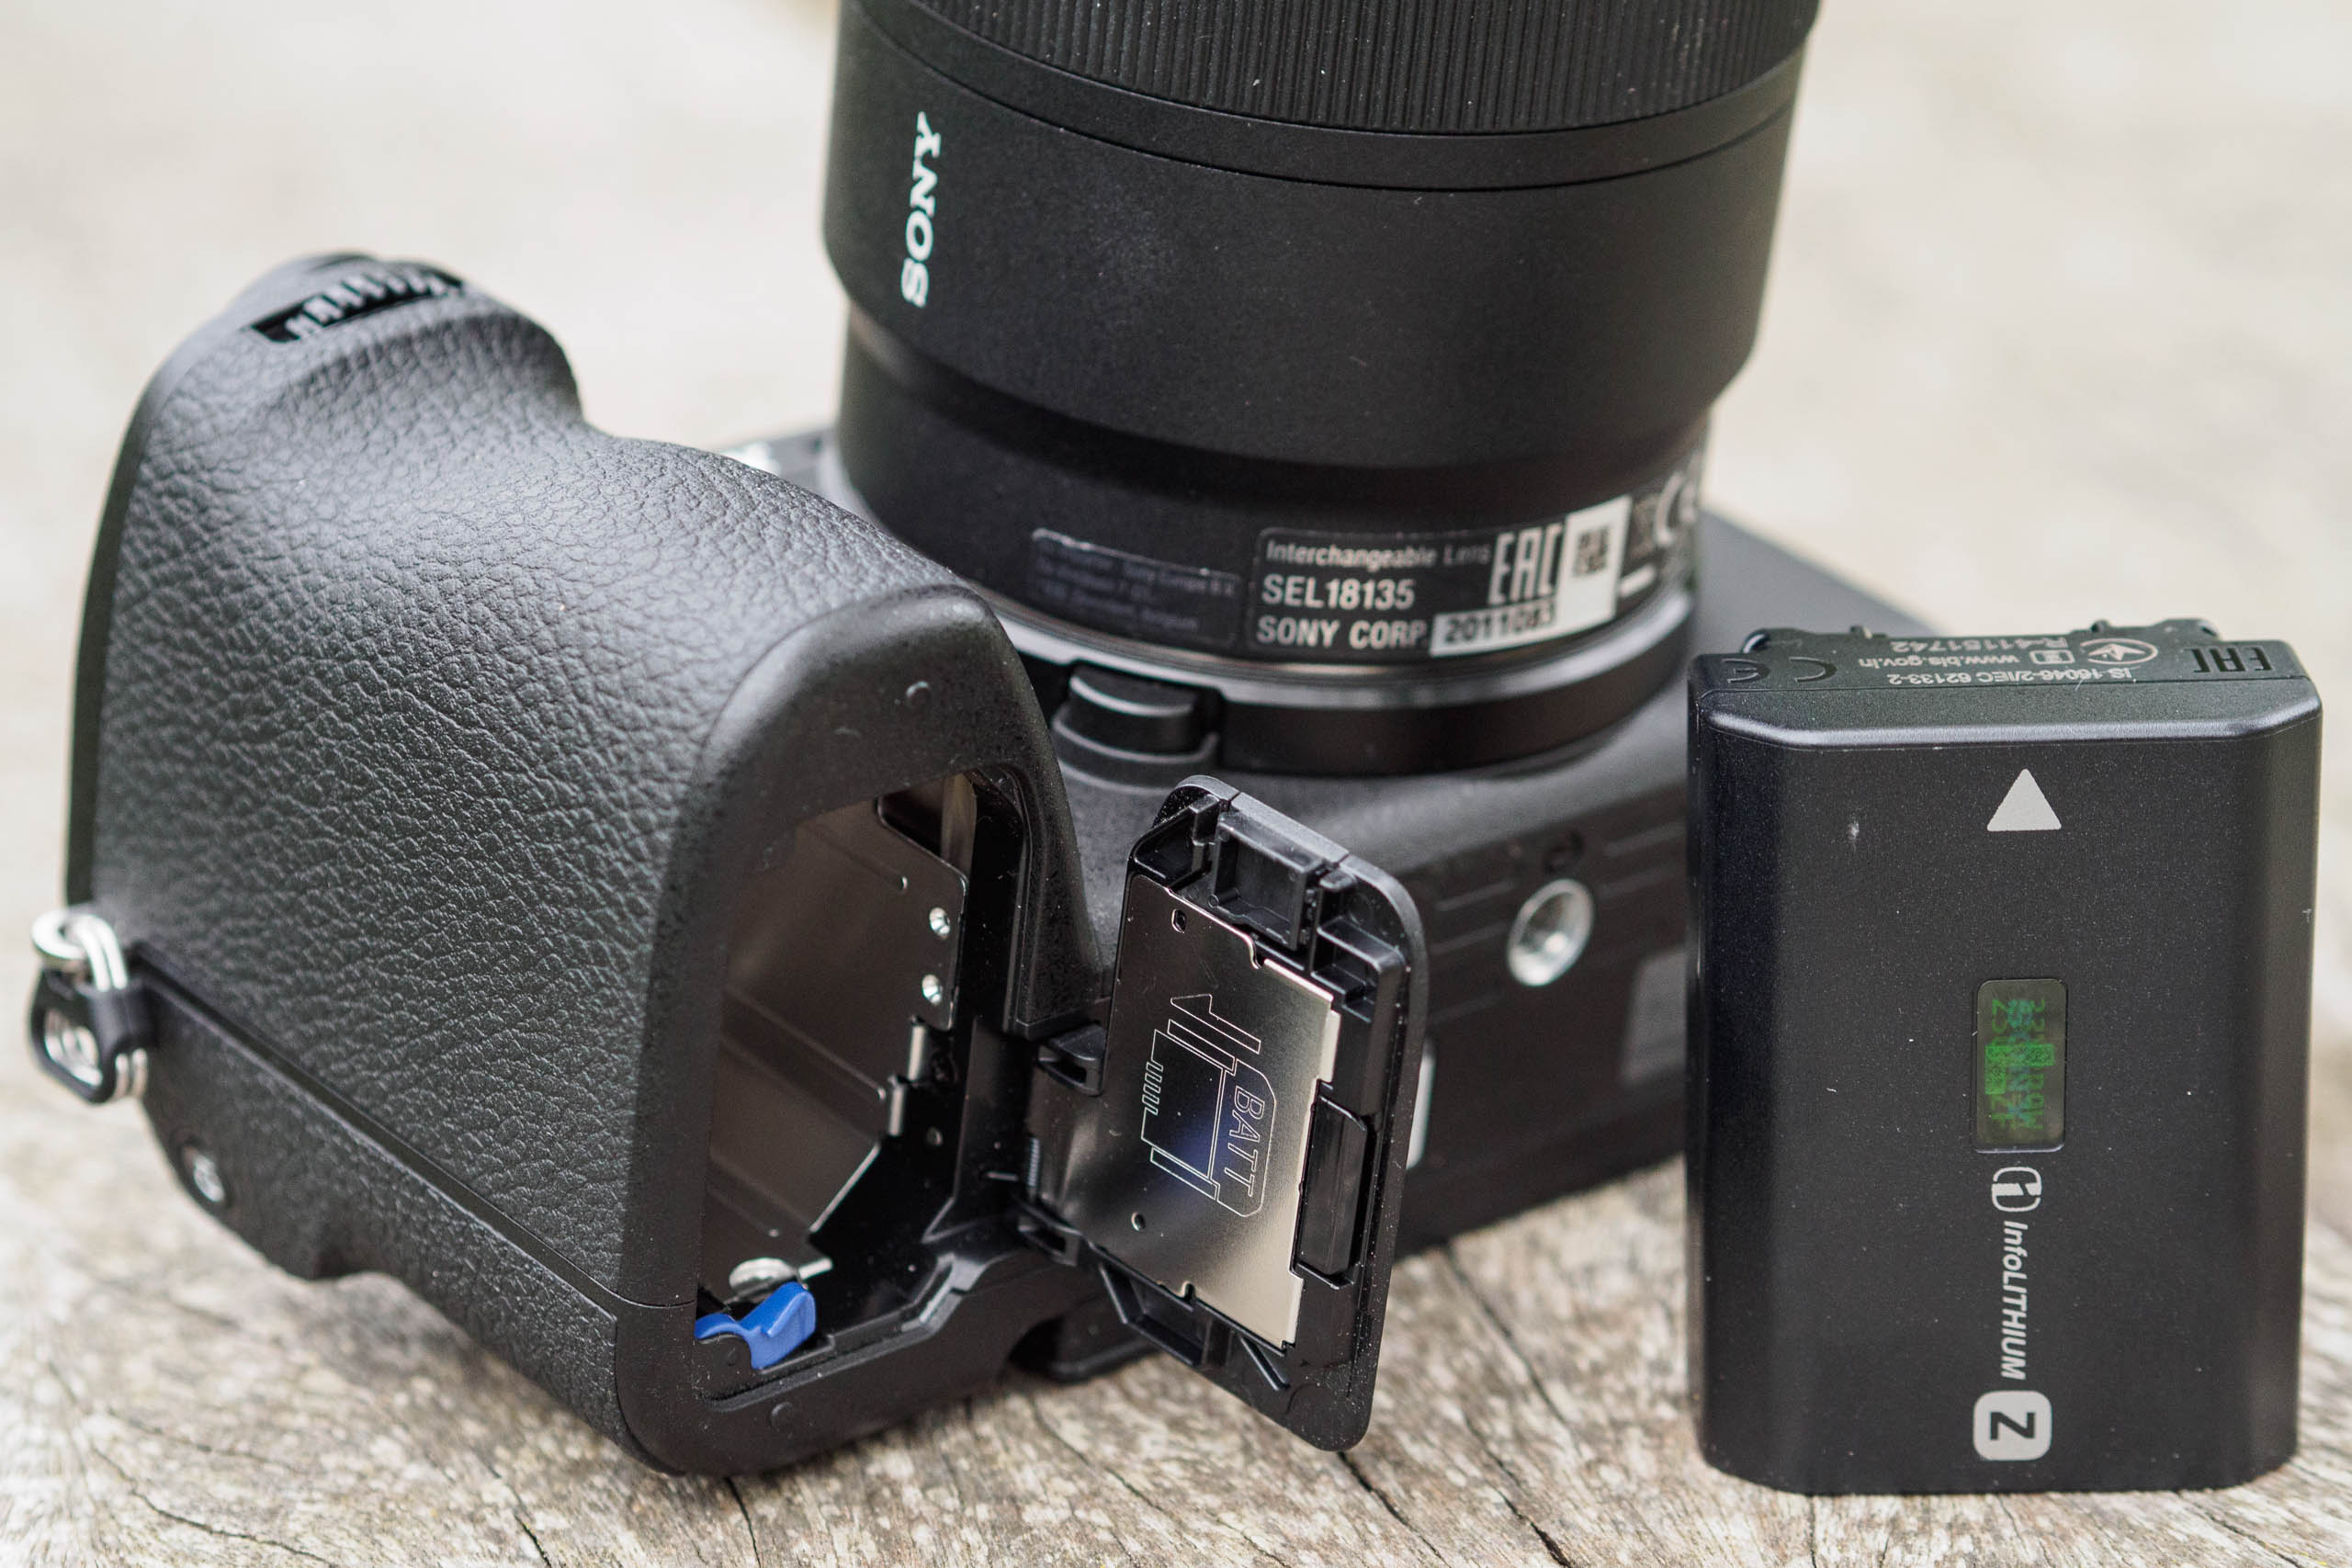 Sony a6700 review: Digital Photography Review